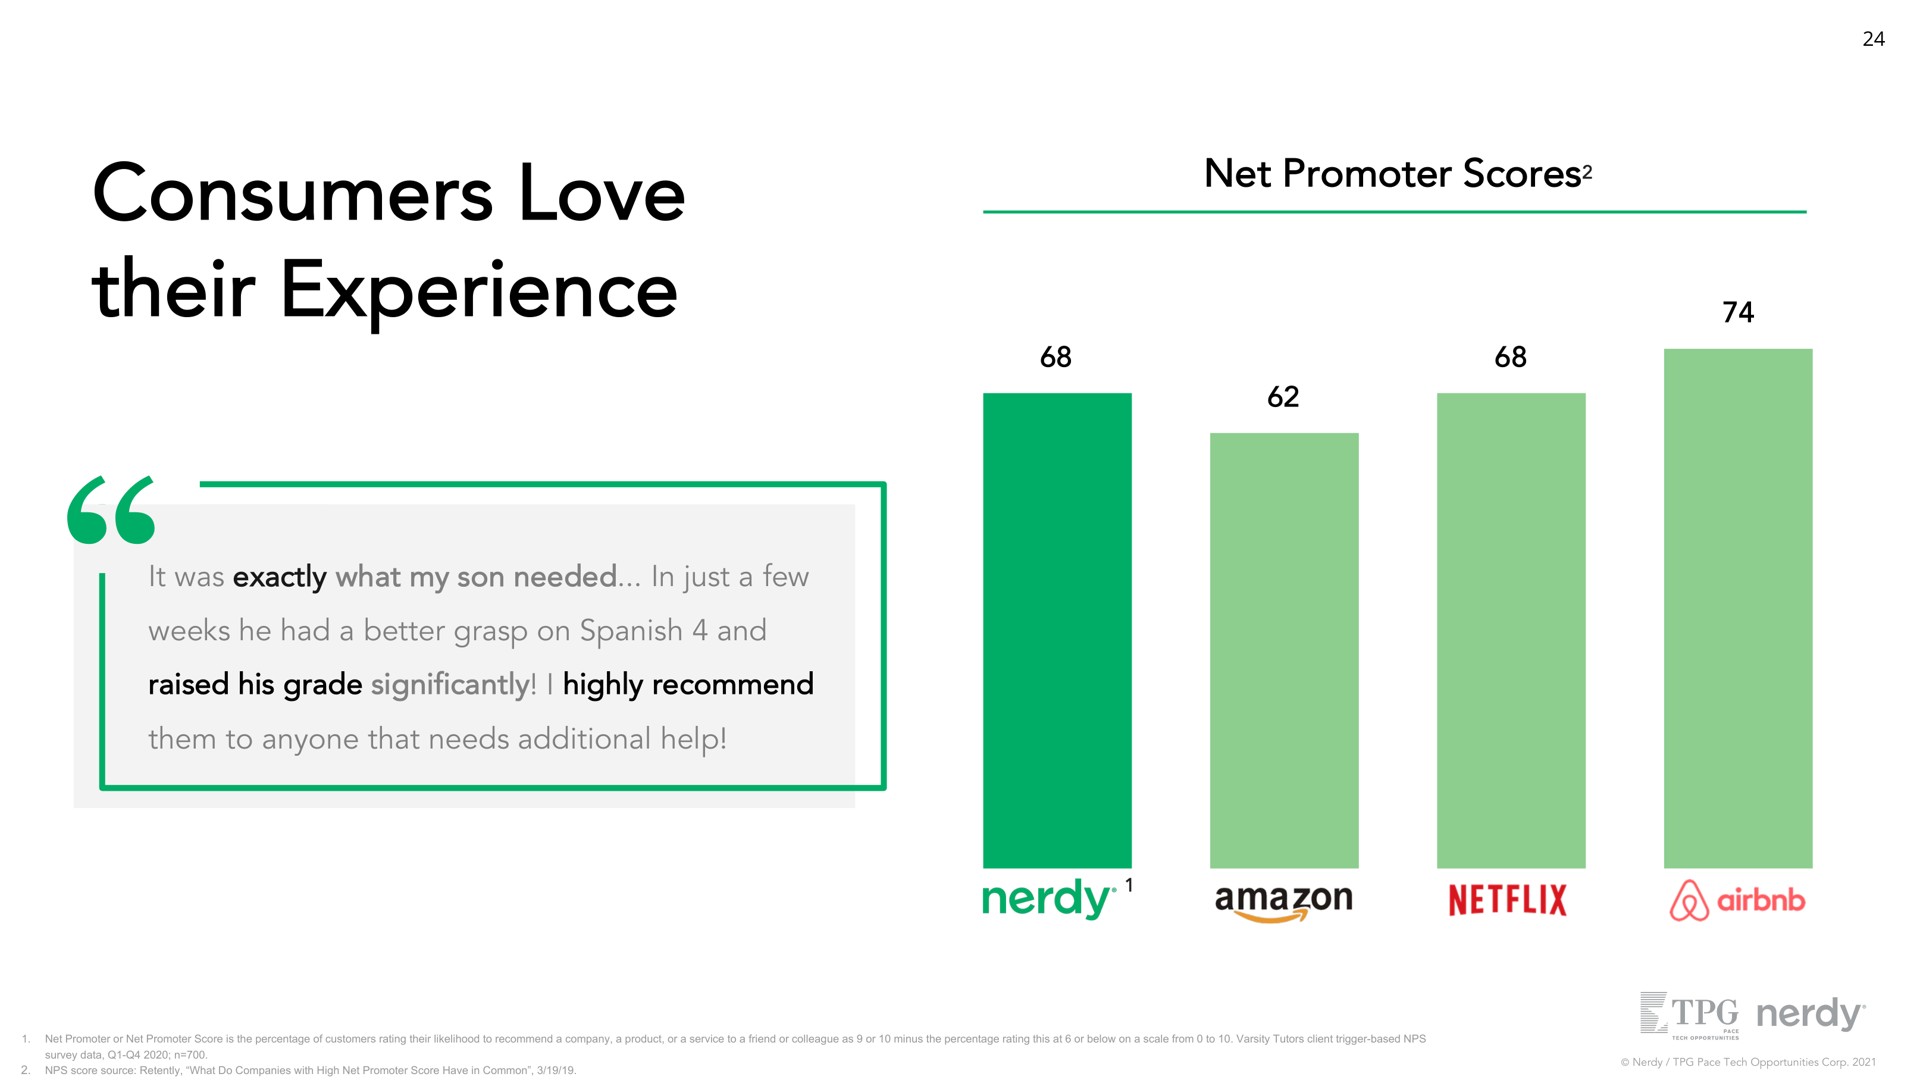 consumers love their experience net promoter scores it was exactly what my son needed in just a few weeks he had a better grasp on and raised his grade significantly i highly recommend them to anyone that needs additional help net promoter or net promoter score is the percentage of customers rating their likelihood to recommend a company a product or a service to a friend or colleague as or minus the percentage rating this at or below on a scale from to varsity tutors client trigger based survey data score source what do companies with high net promoter score have in common pace tech opportunities corp | Nerdy